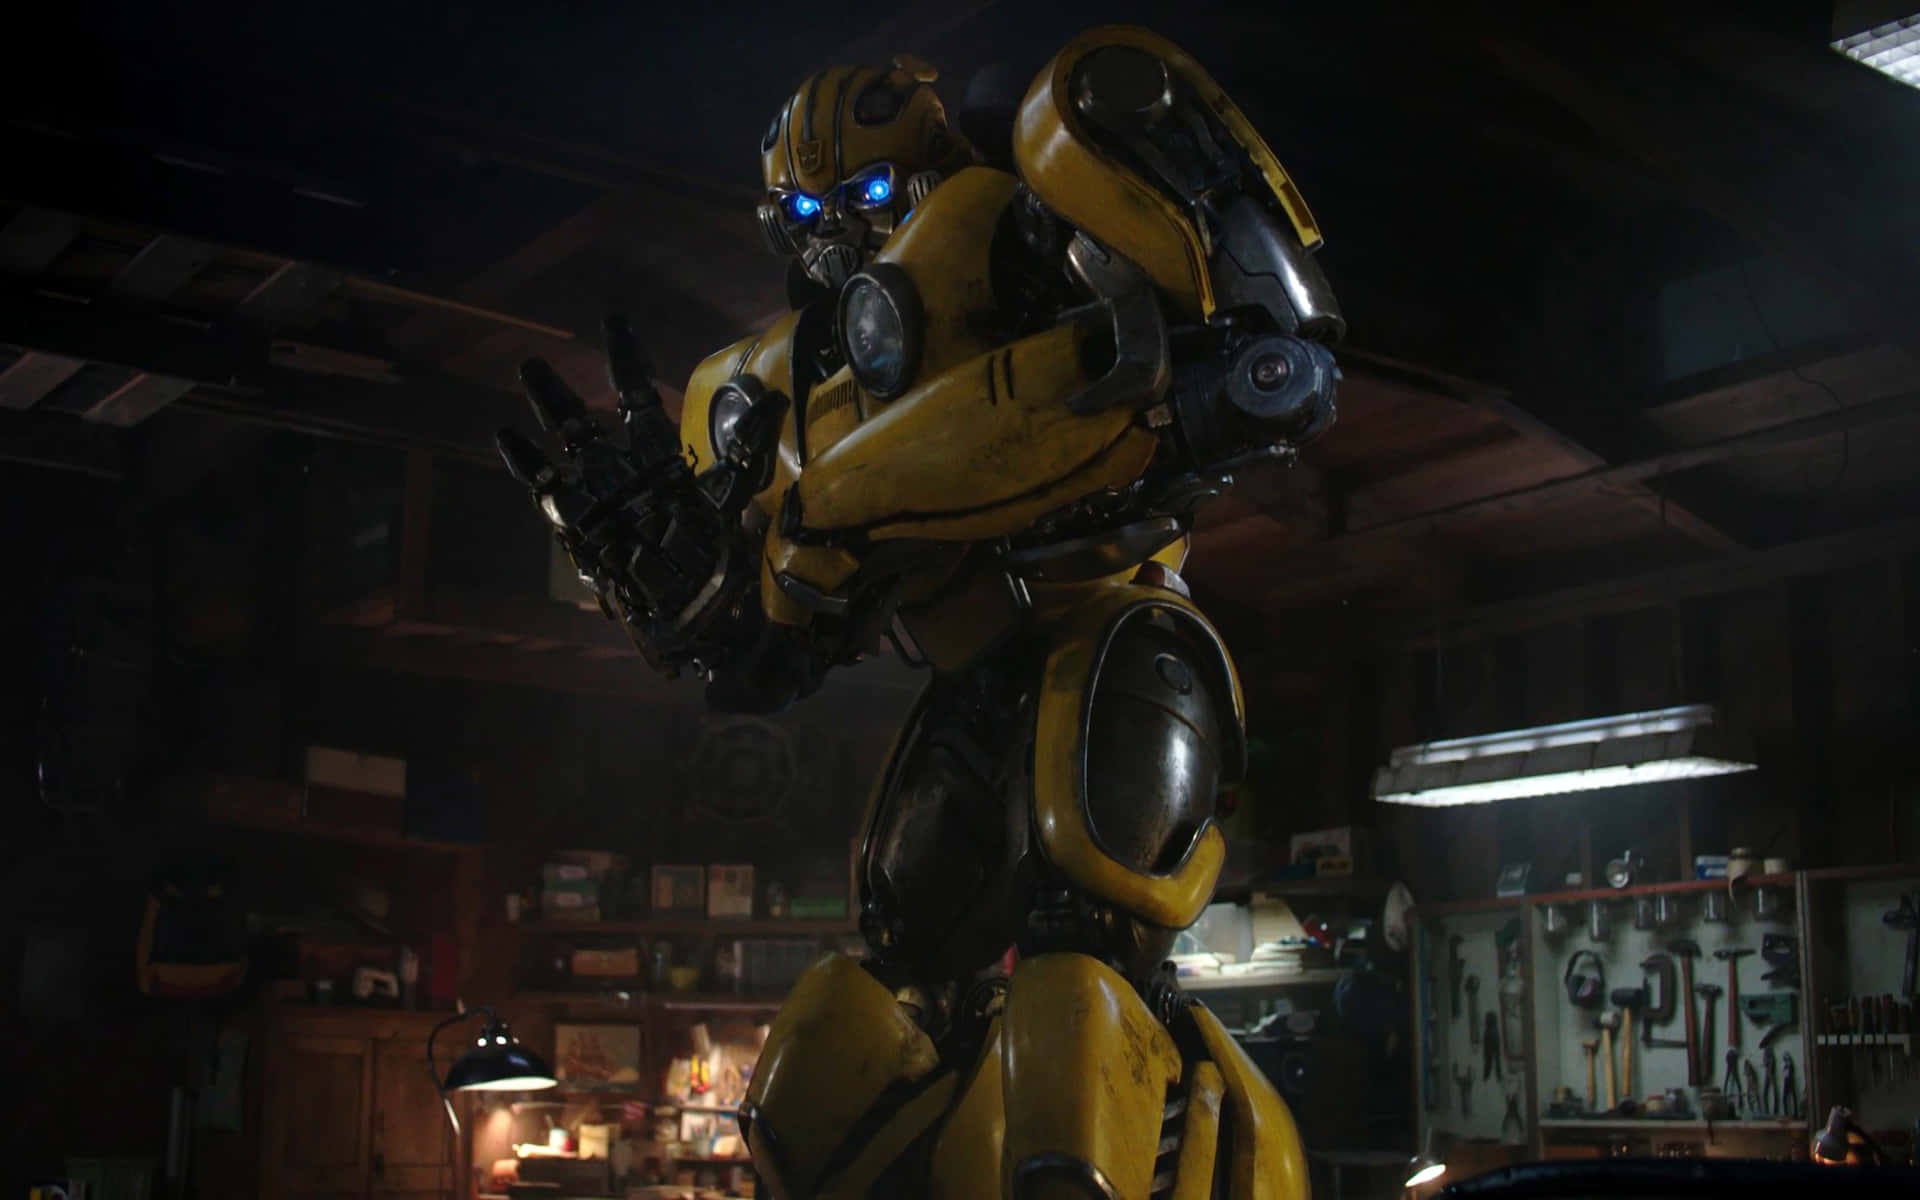 Transformers Bumblebee Posing In A Room